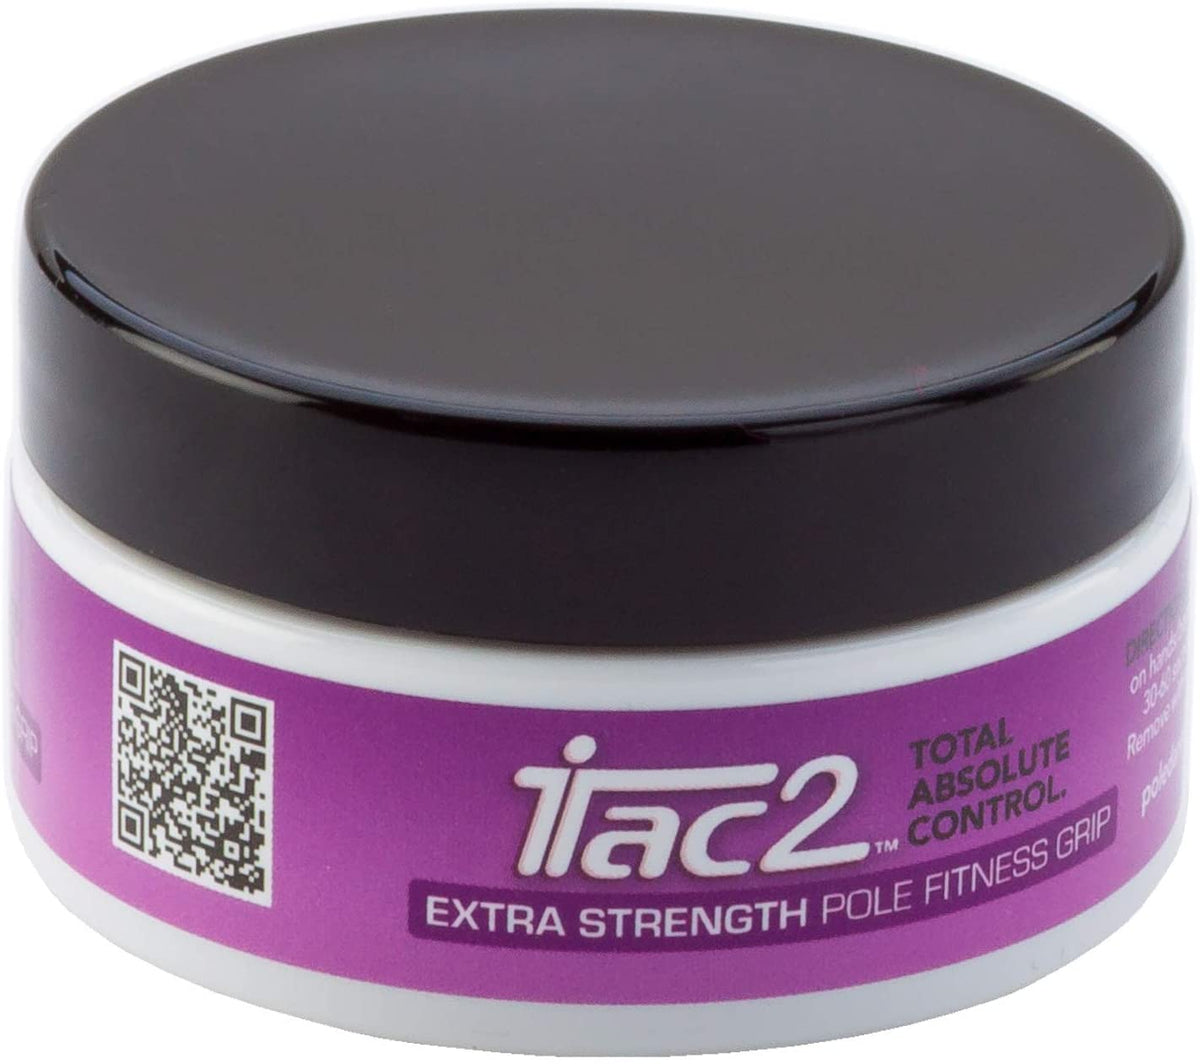 iTAC 2 Pole Dance Grip Extra Strength 45G - Model Express VancouverAccessories